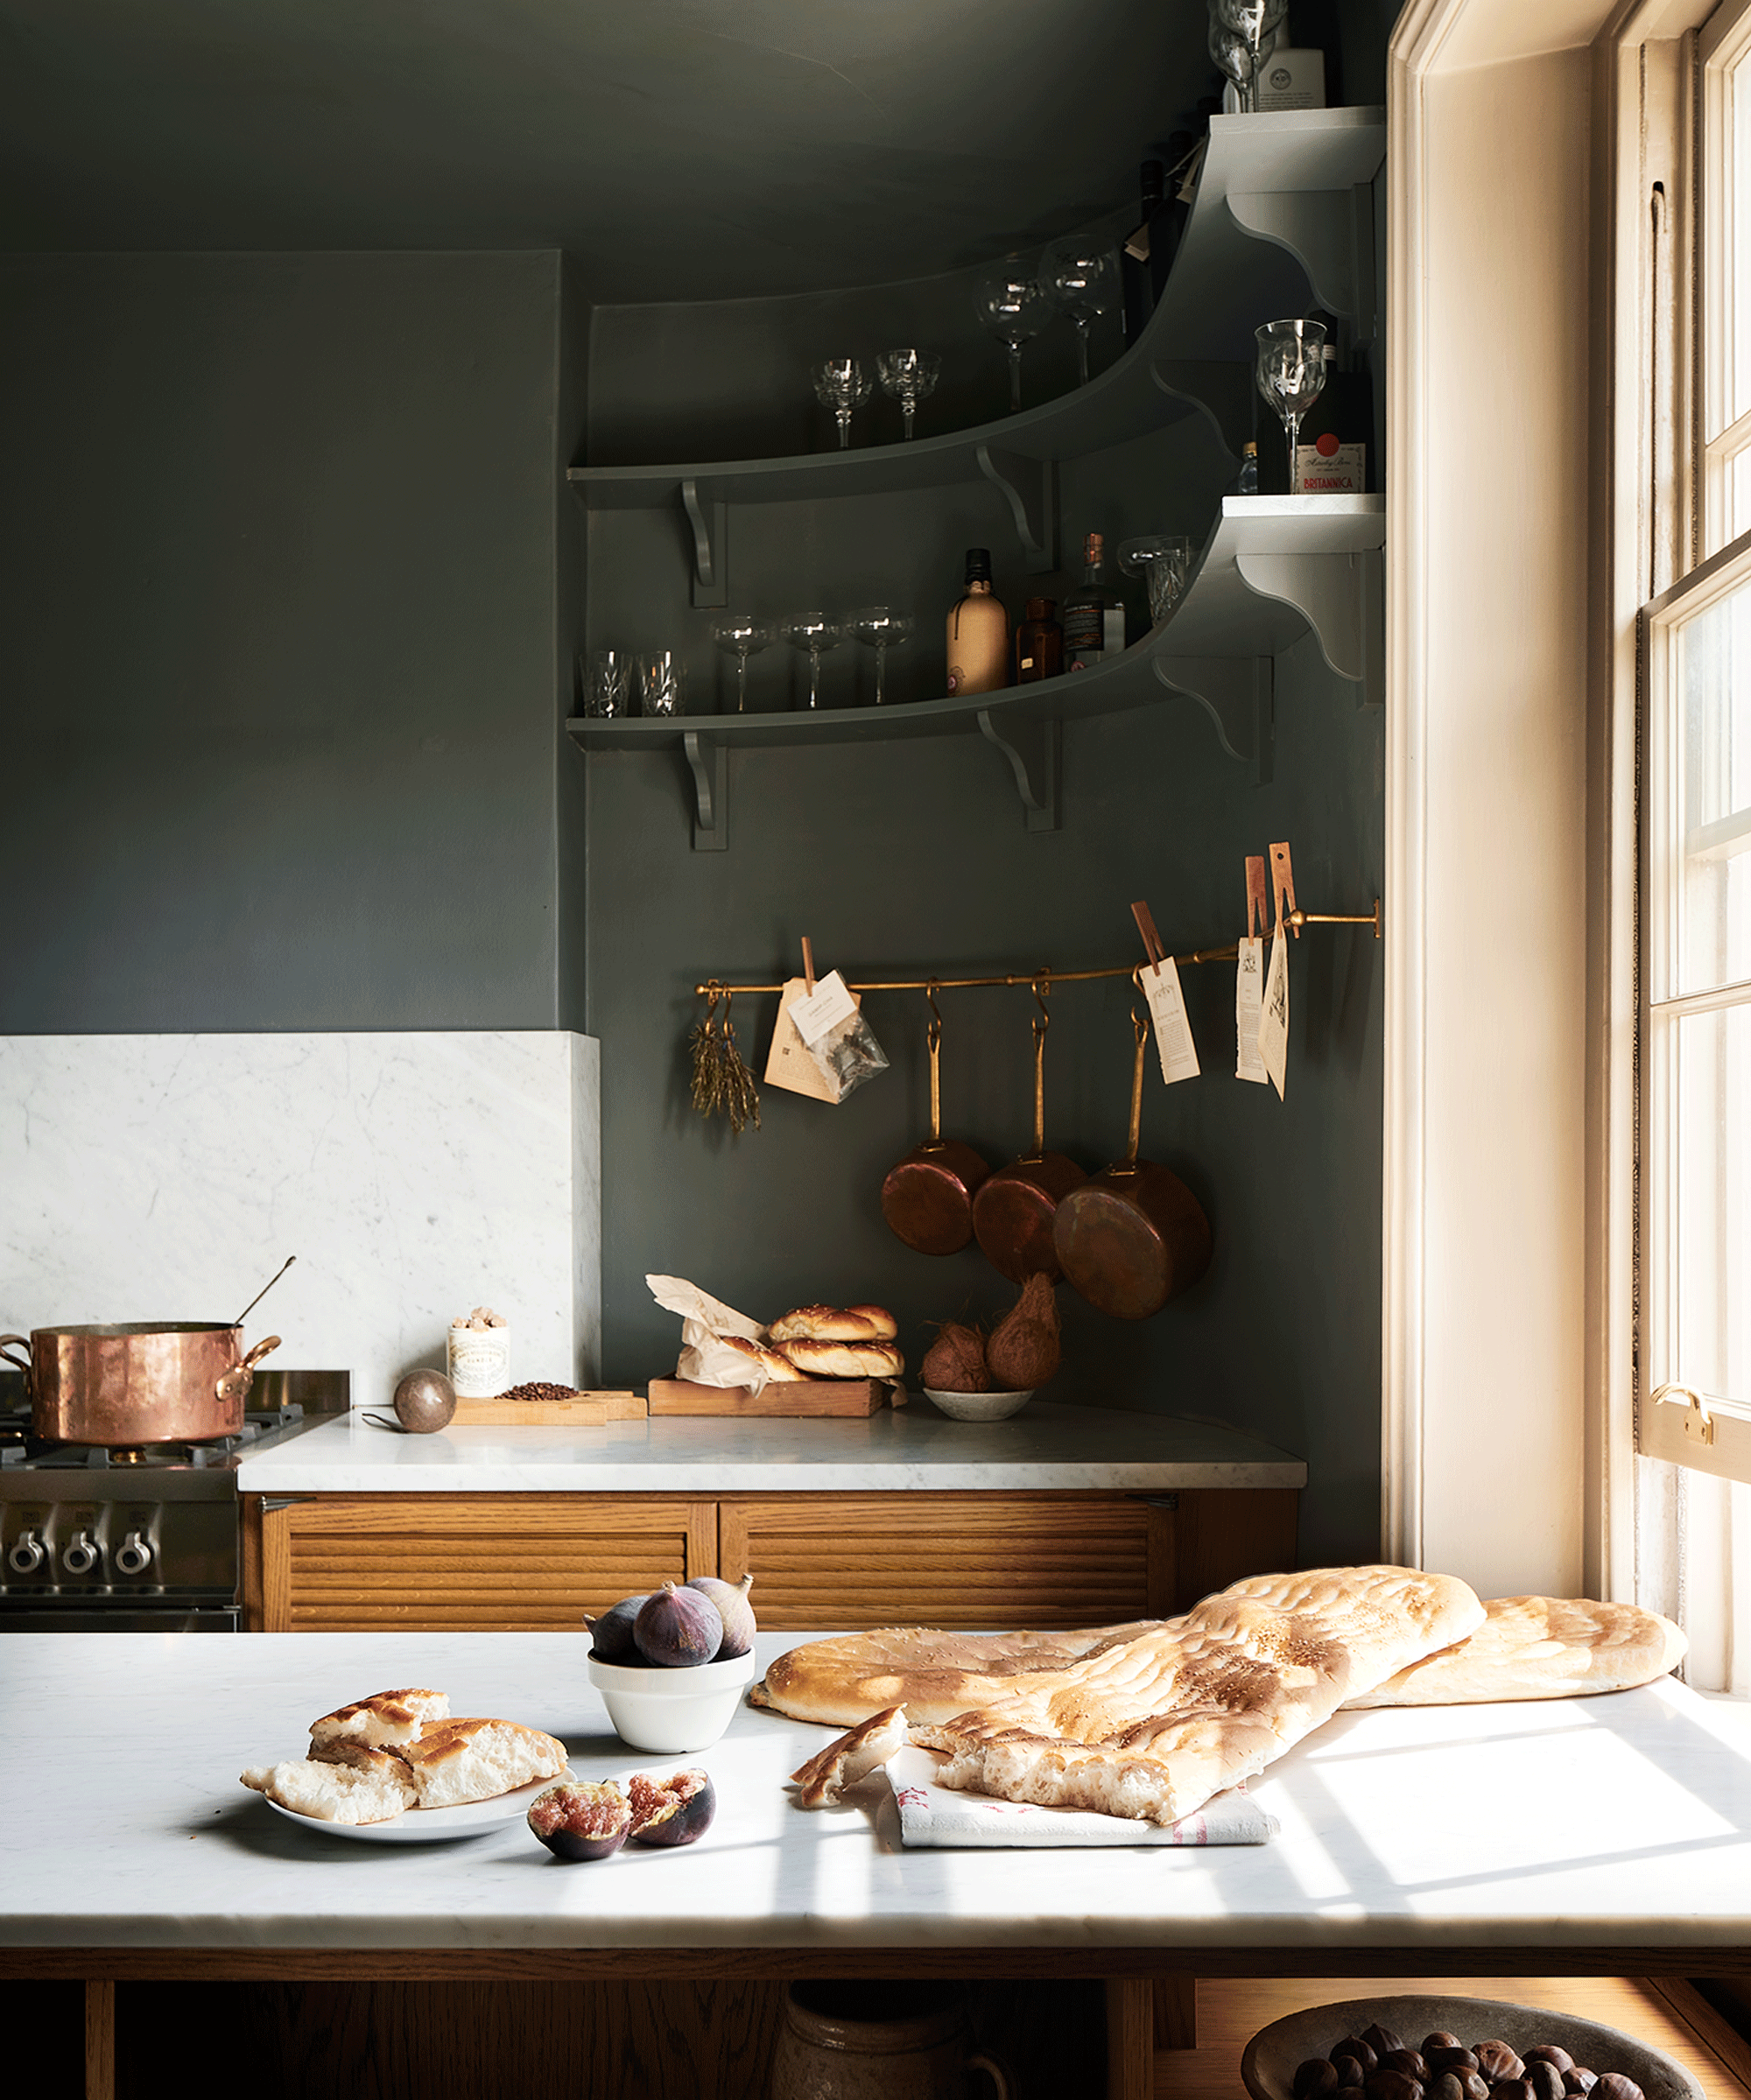 kitchen with dark walls and curved open shelving